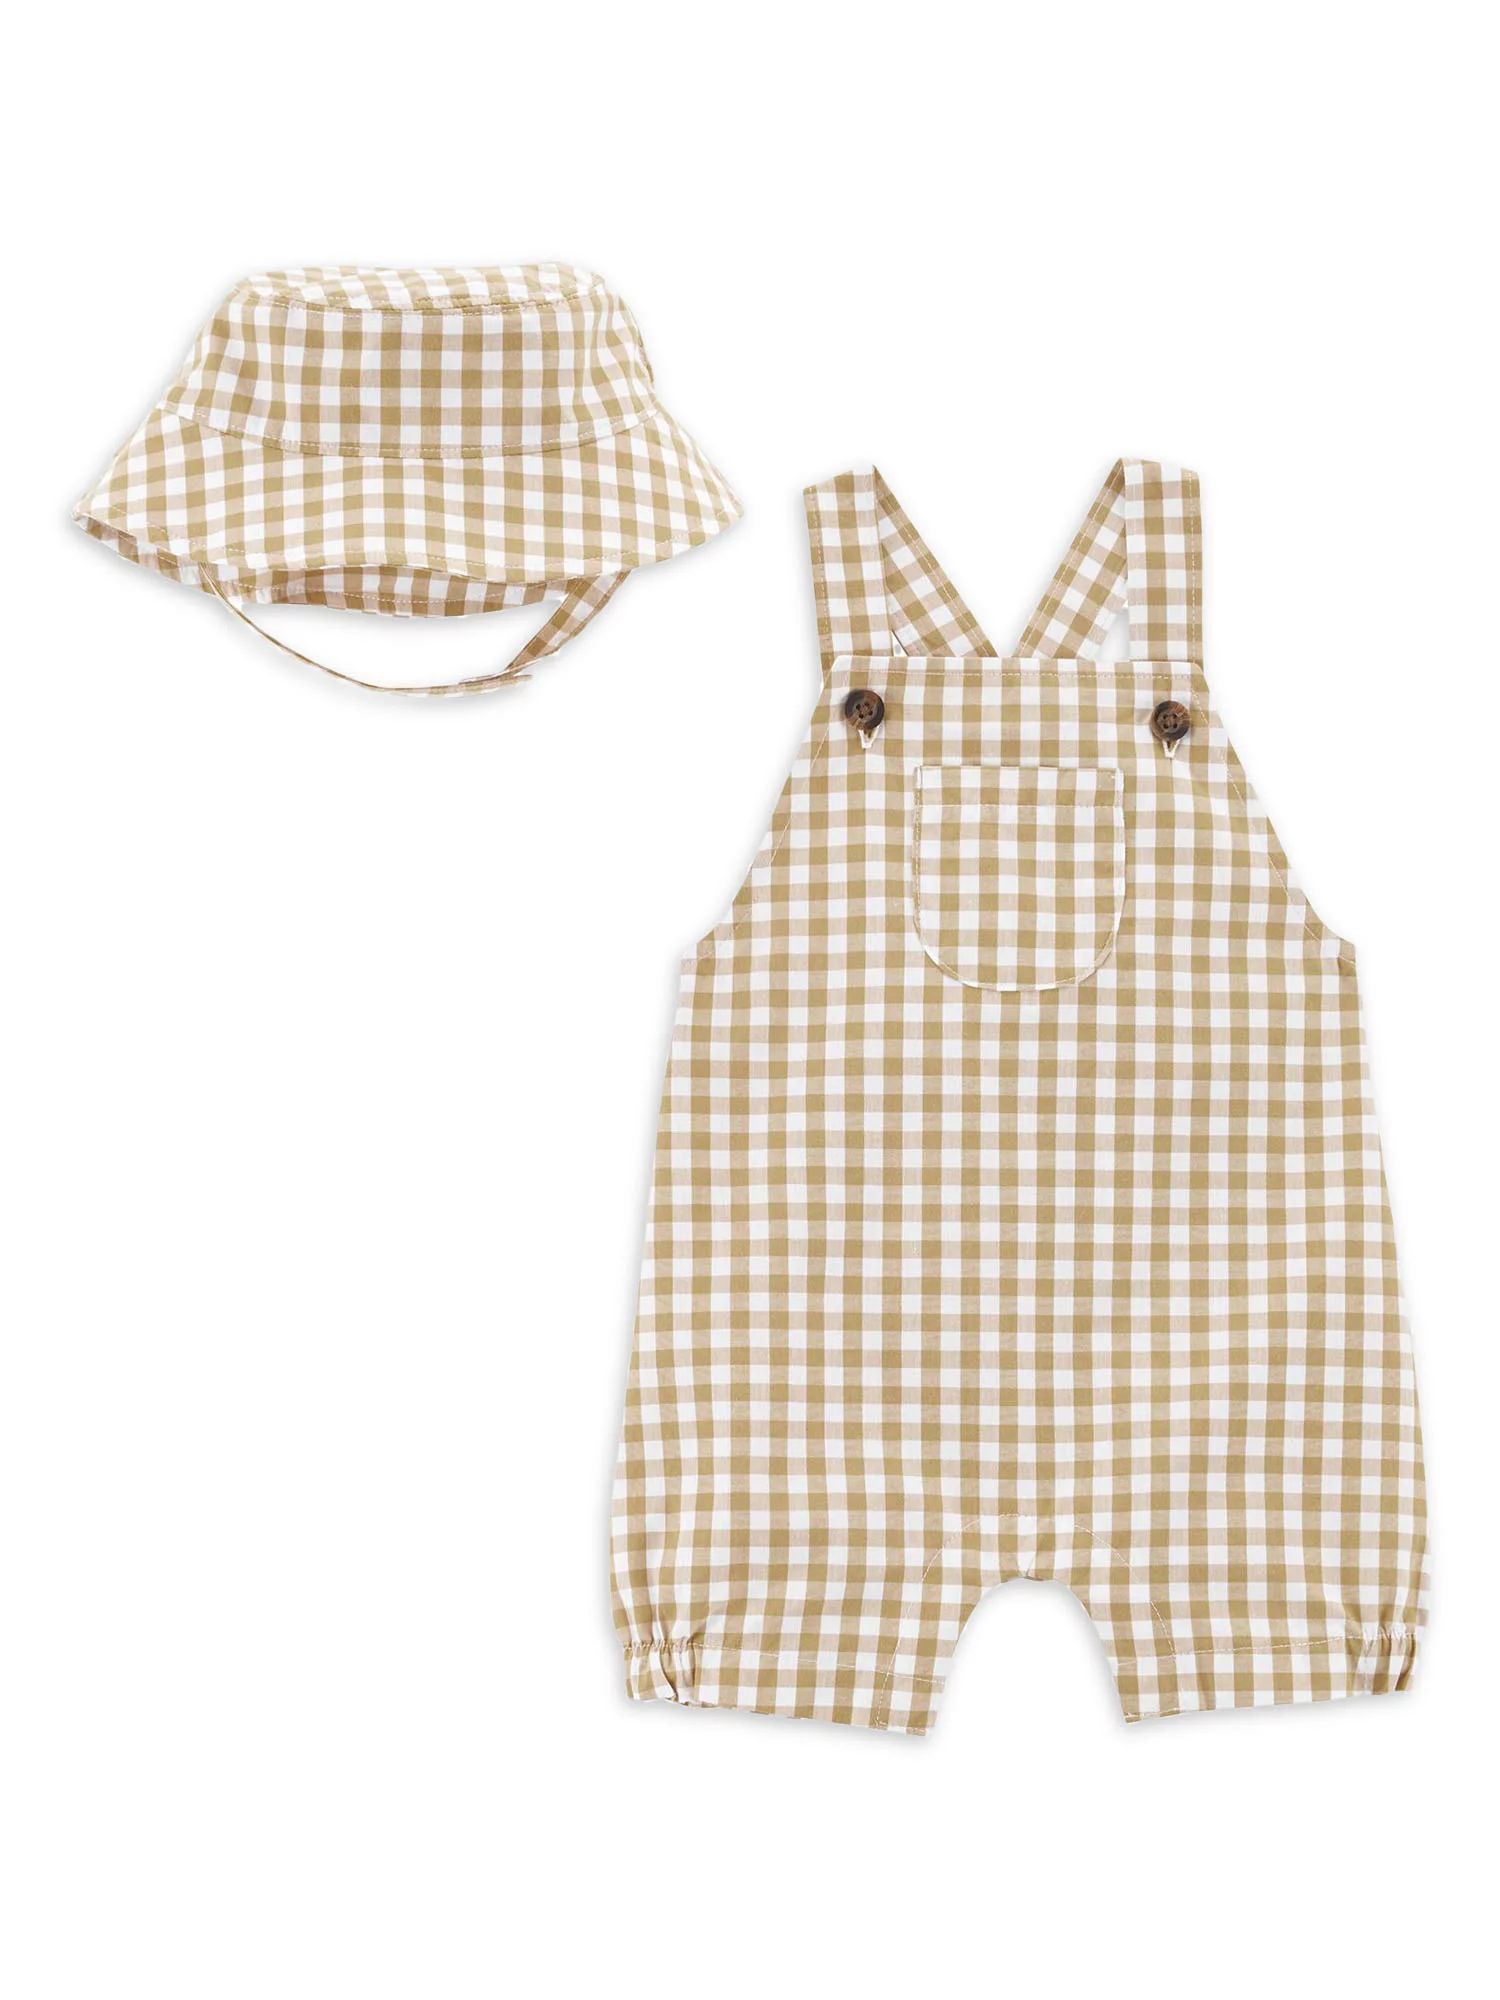 Carter's Child of Mine Baby Boy Overall Romper and Hat Set, 2-Piece, Sizes 0M-24M | Walmart (US)